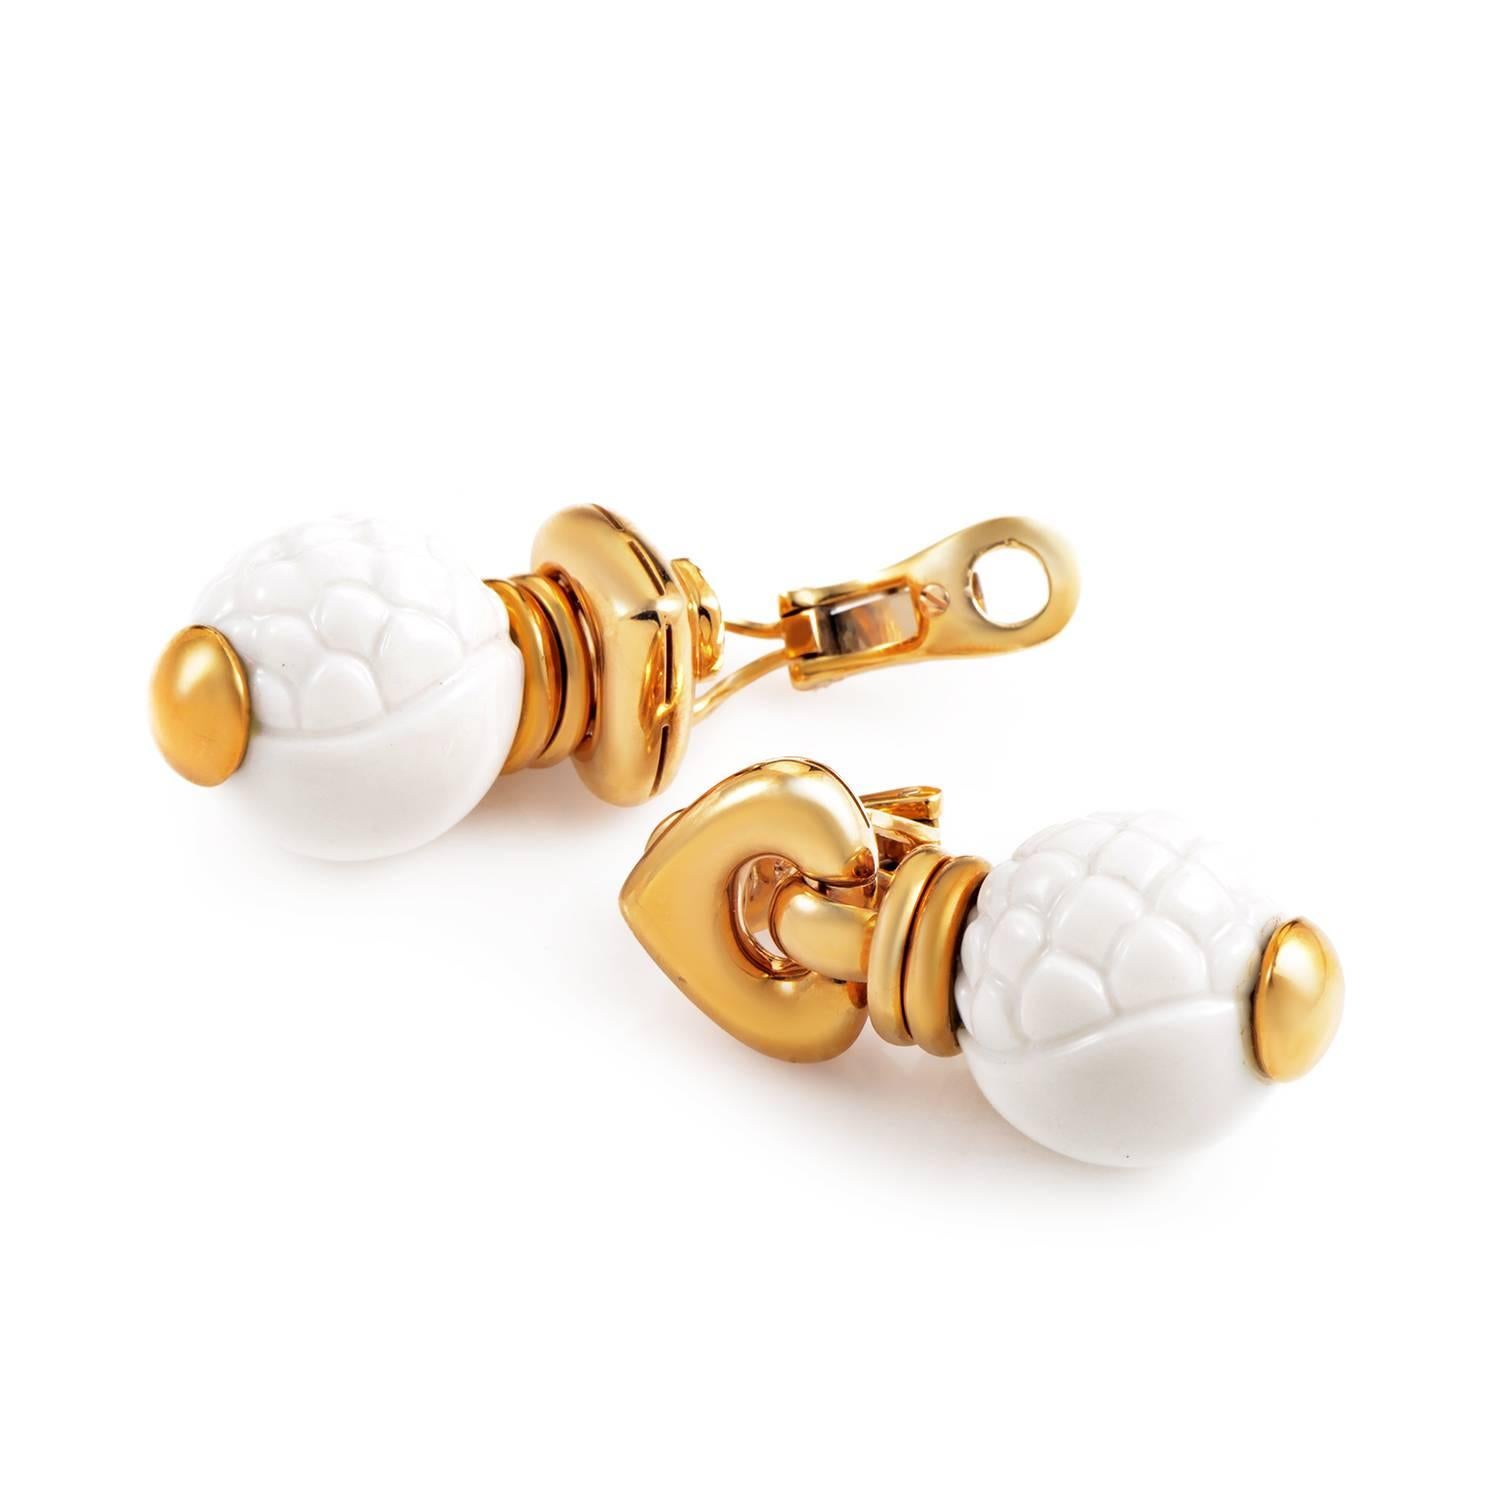 Boasting a rare and exotic look, this pair of earrings from Bulgari's Chandra collection are without comparison. The earrings are made of 18K yellow gold with delicate dangling white ceramic spheres. Each ceramic accent is painstakingly carved for